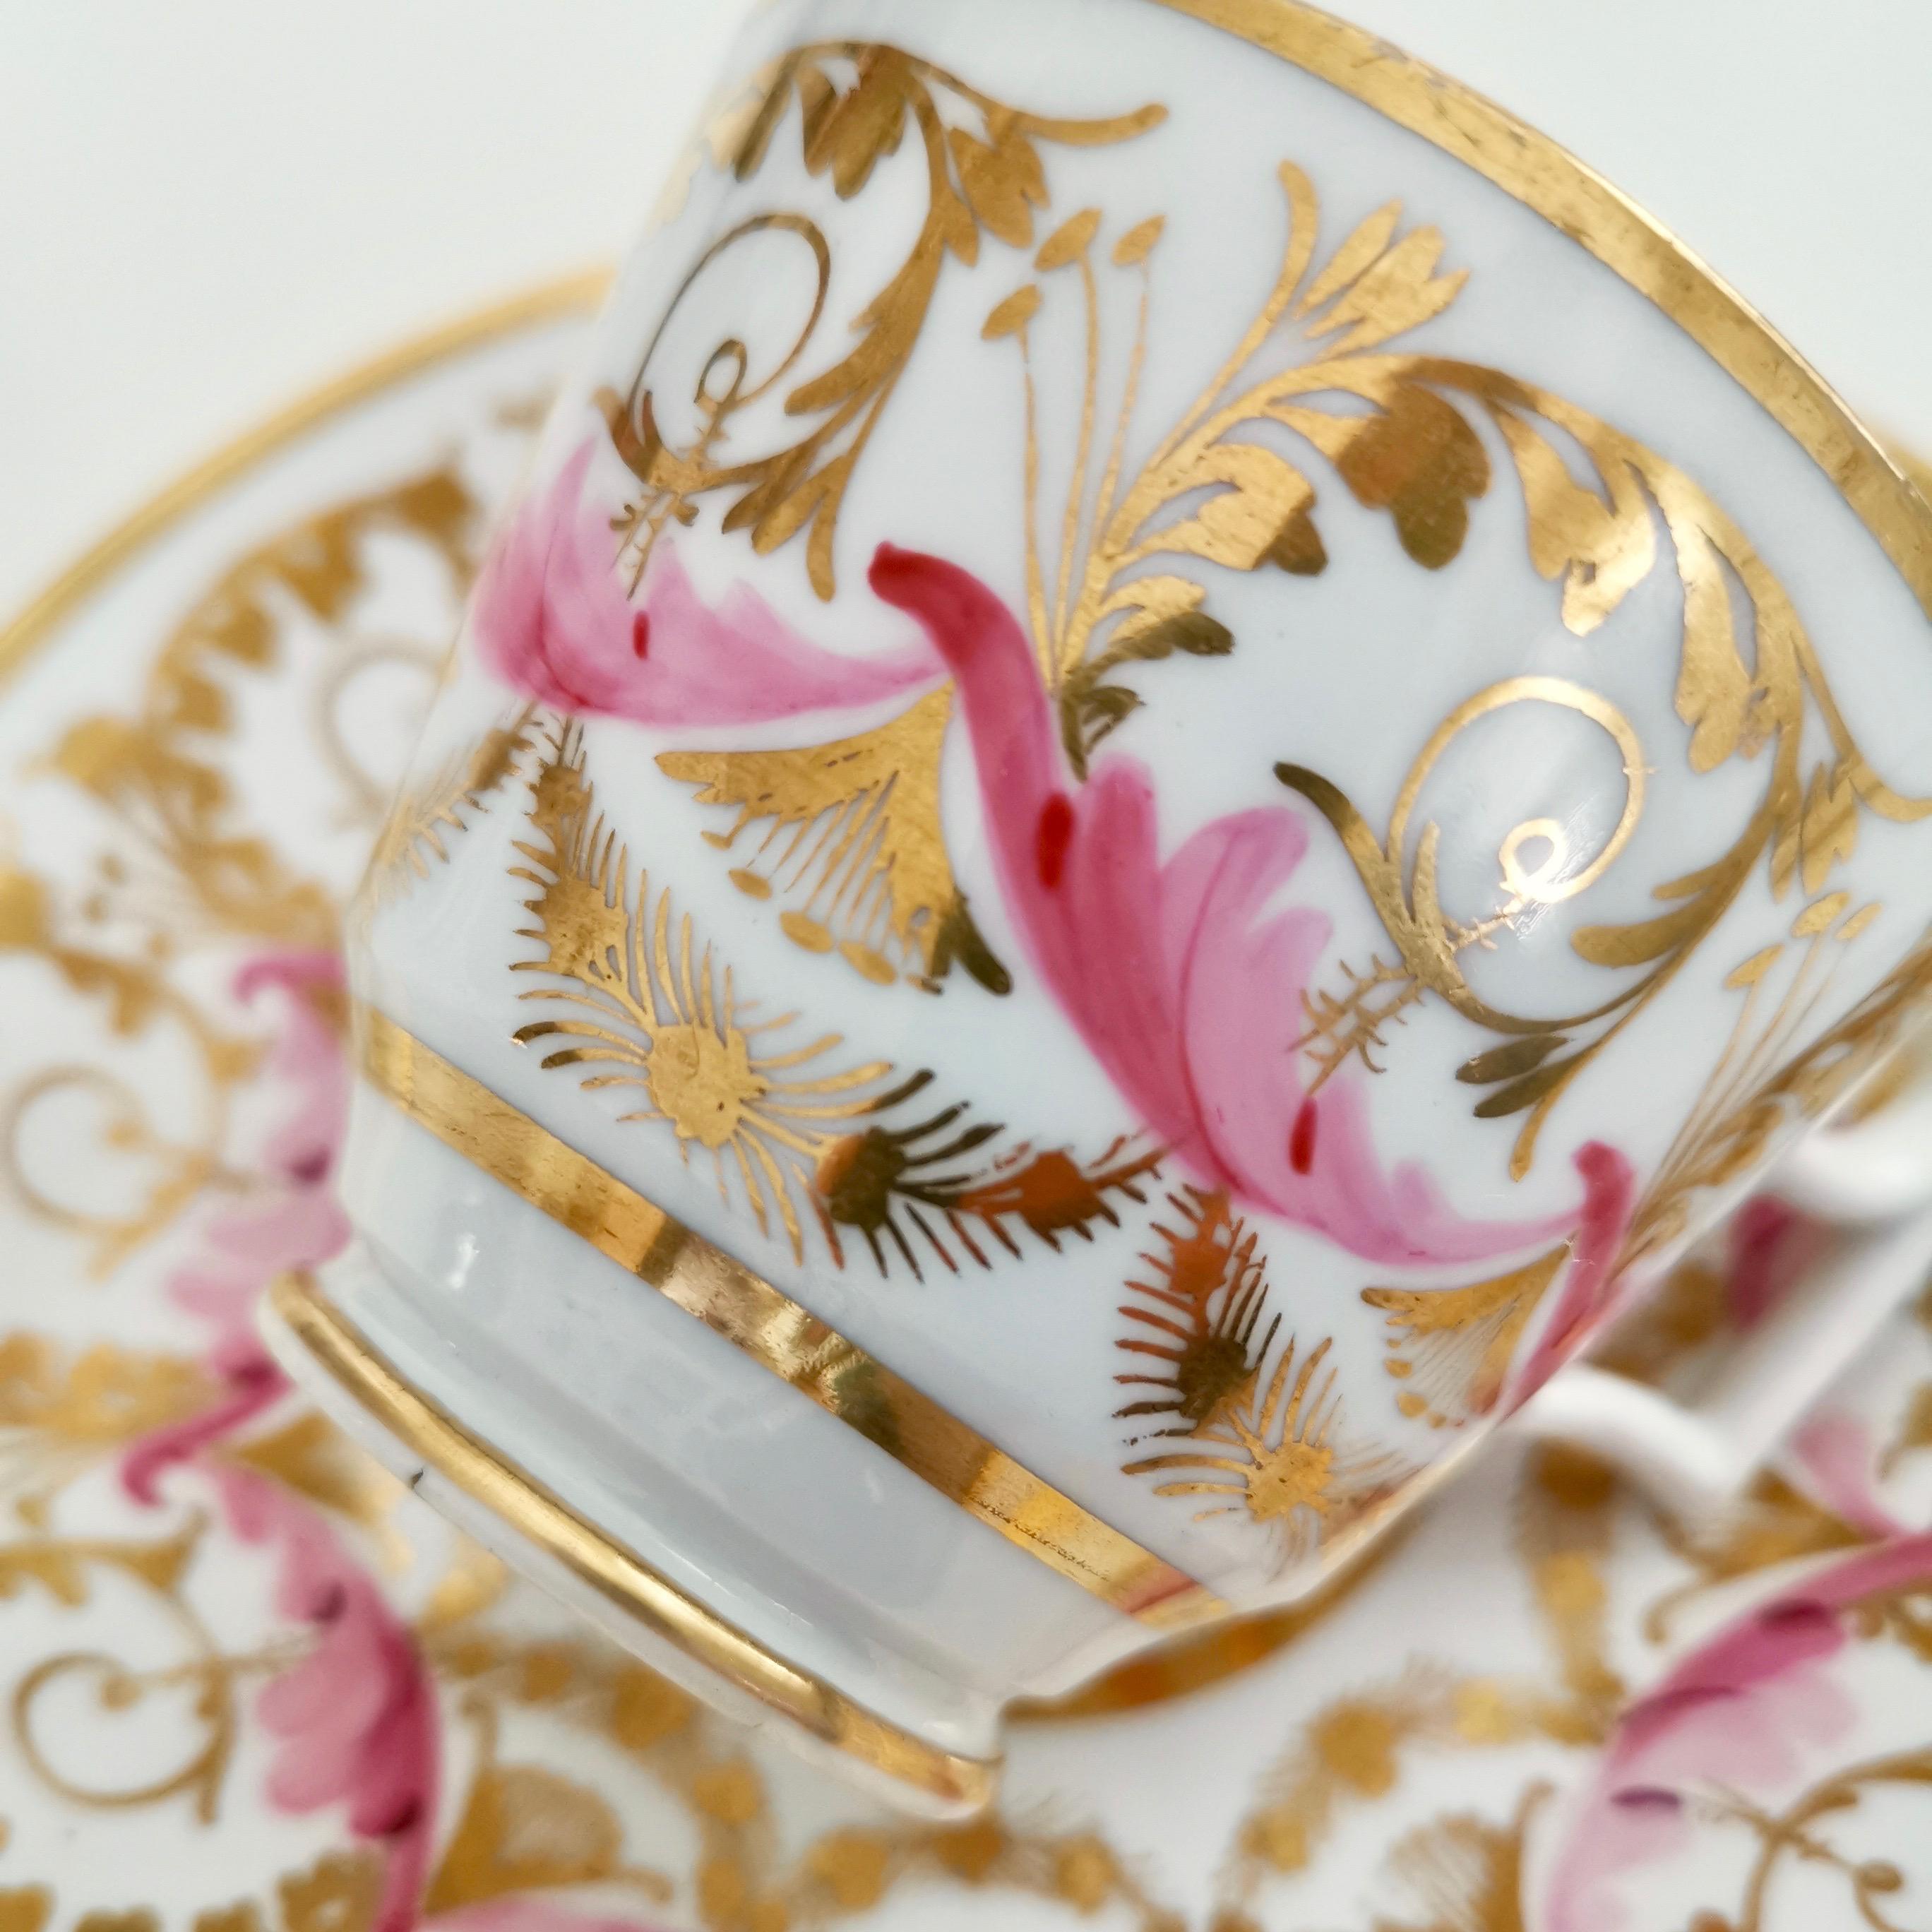 Early 19th Century New Hall Cup and Saucer, Gilt and Pink Sprigs, Regency, 1815-1820